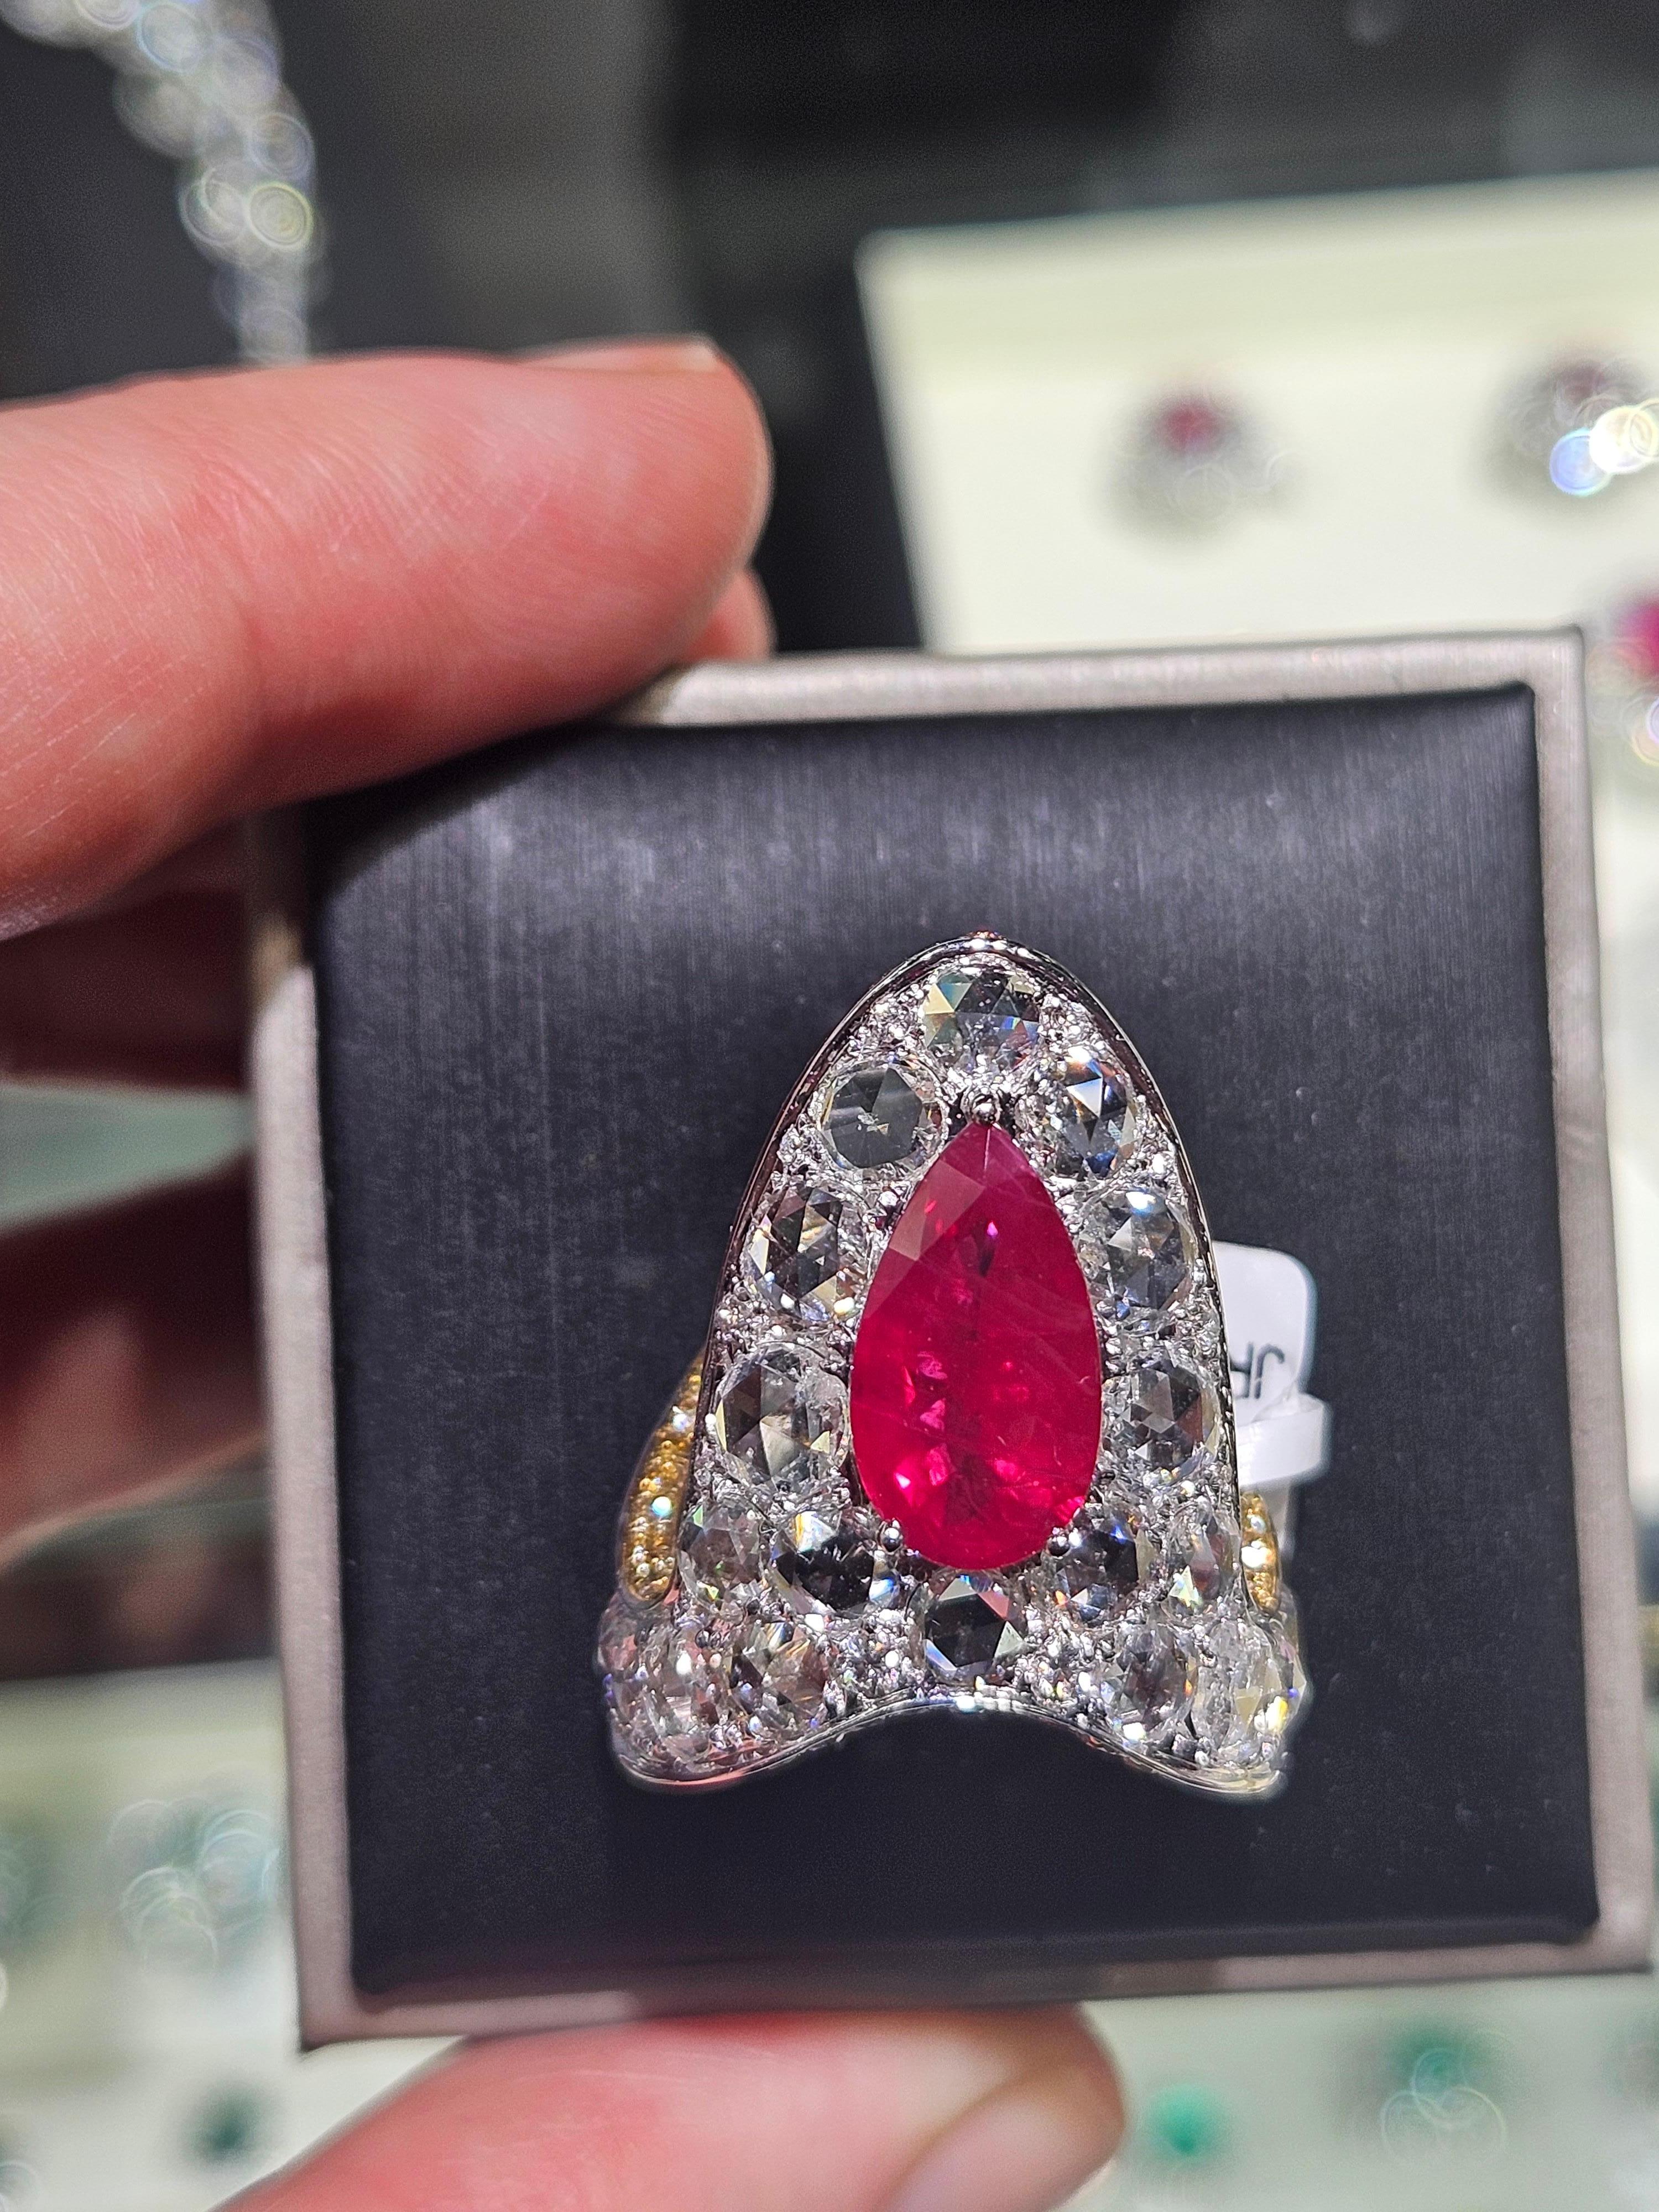 The Following Item we are offering is a Rare Important Radiant White Gold Large Fancy Manicured Nail Ruby Diamond Ring. Ring is comprised of A Gorgeous Fancy Fiery Ruby surrounded with Exquisite Glittering Rose Cut Diamonds and Fancy Colored